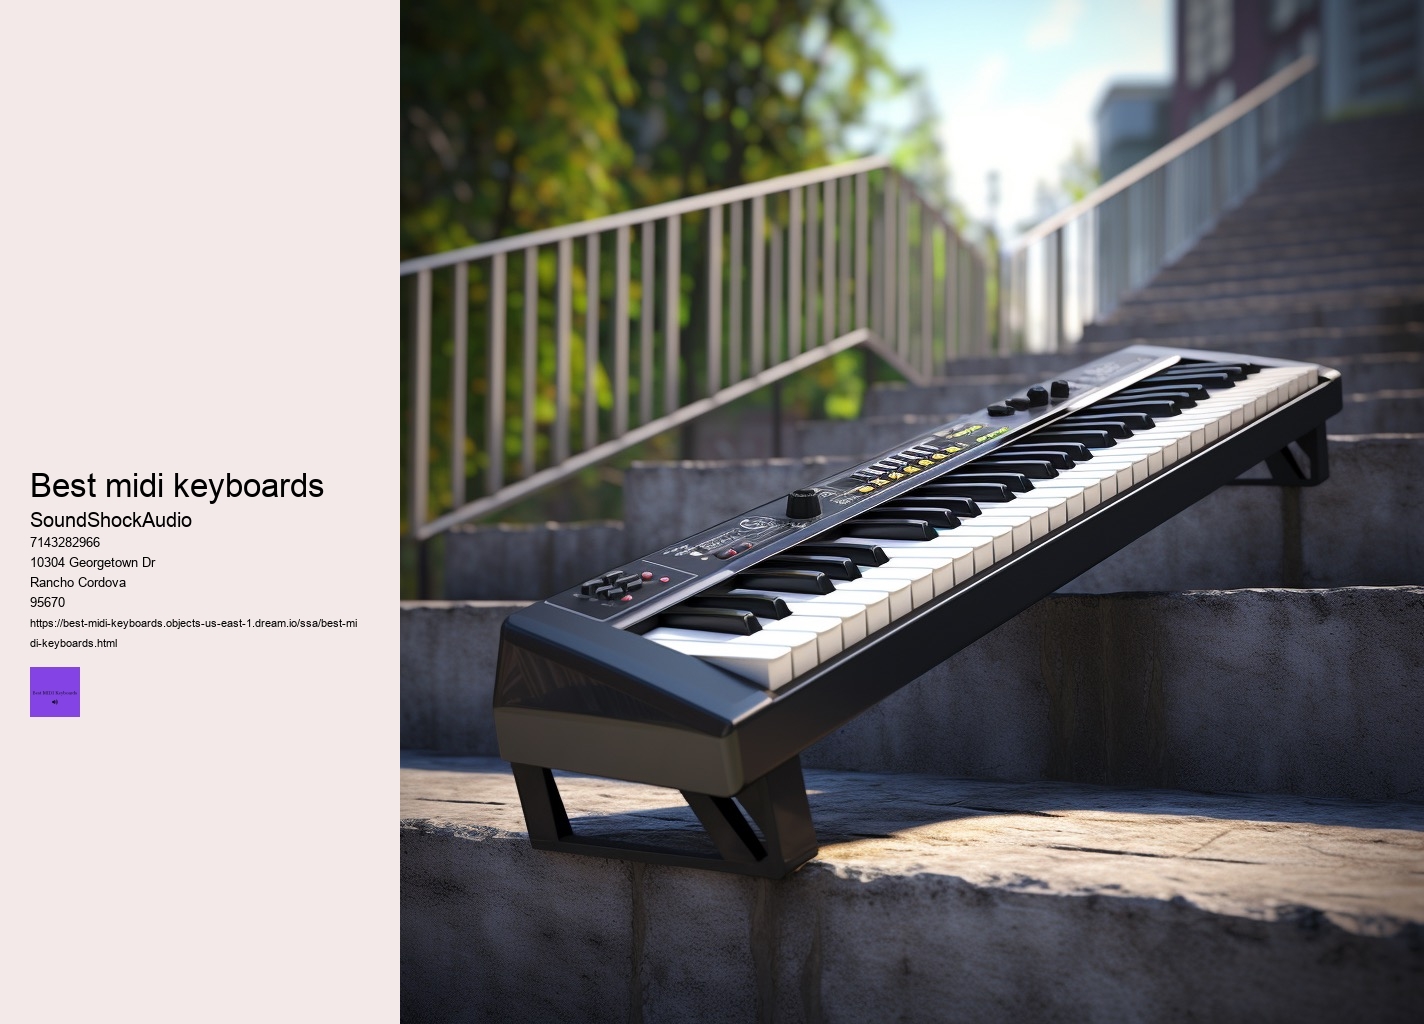 What is the difference between a keyboard and a MIDI keyboard?